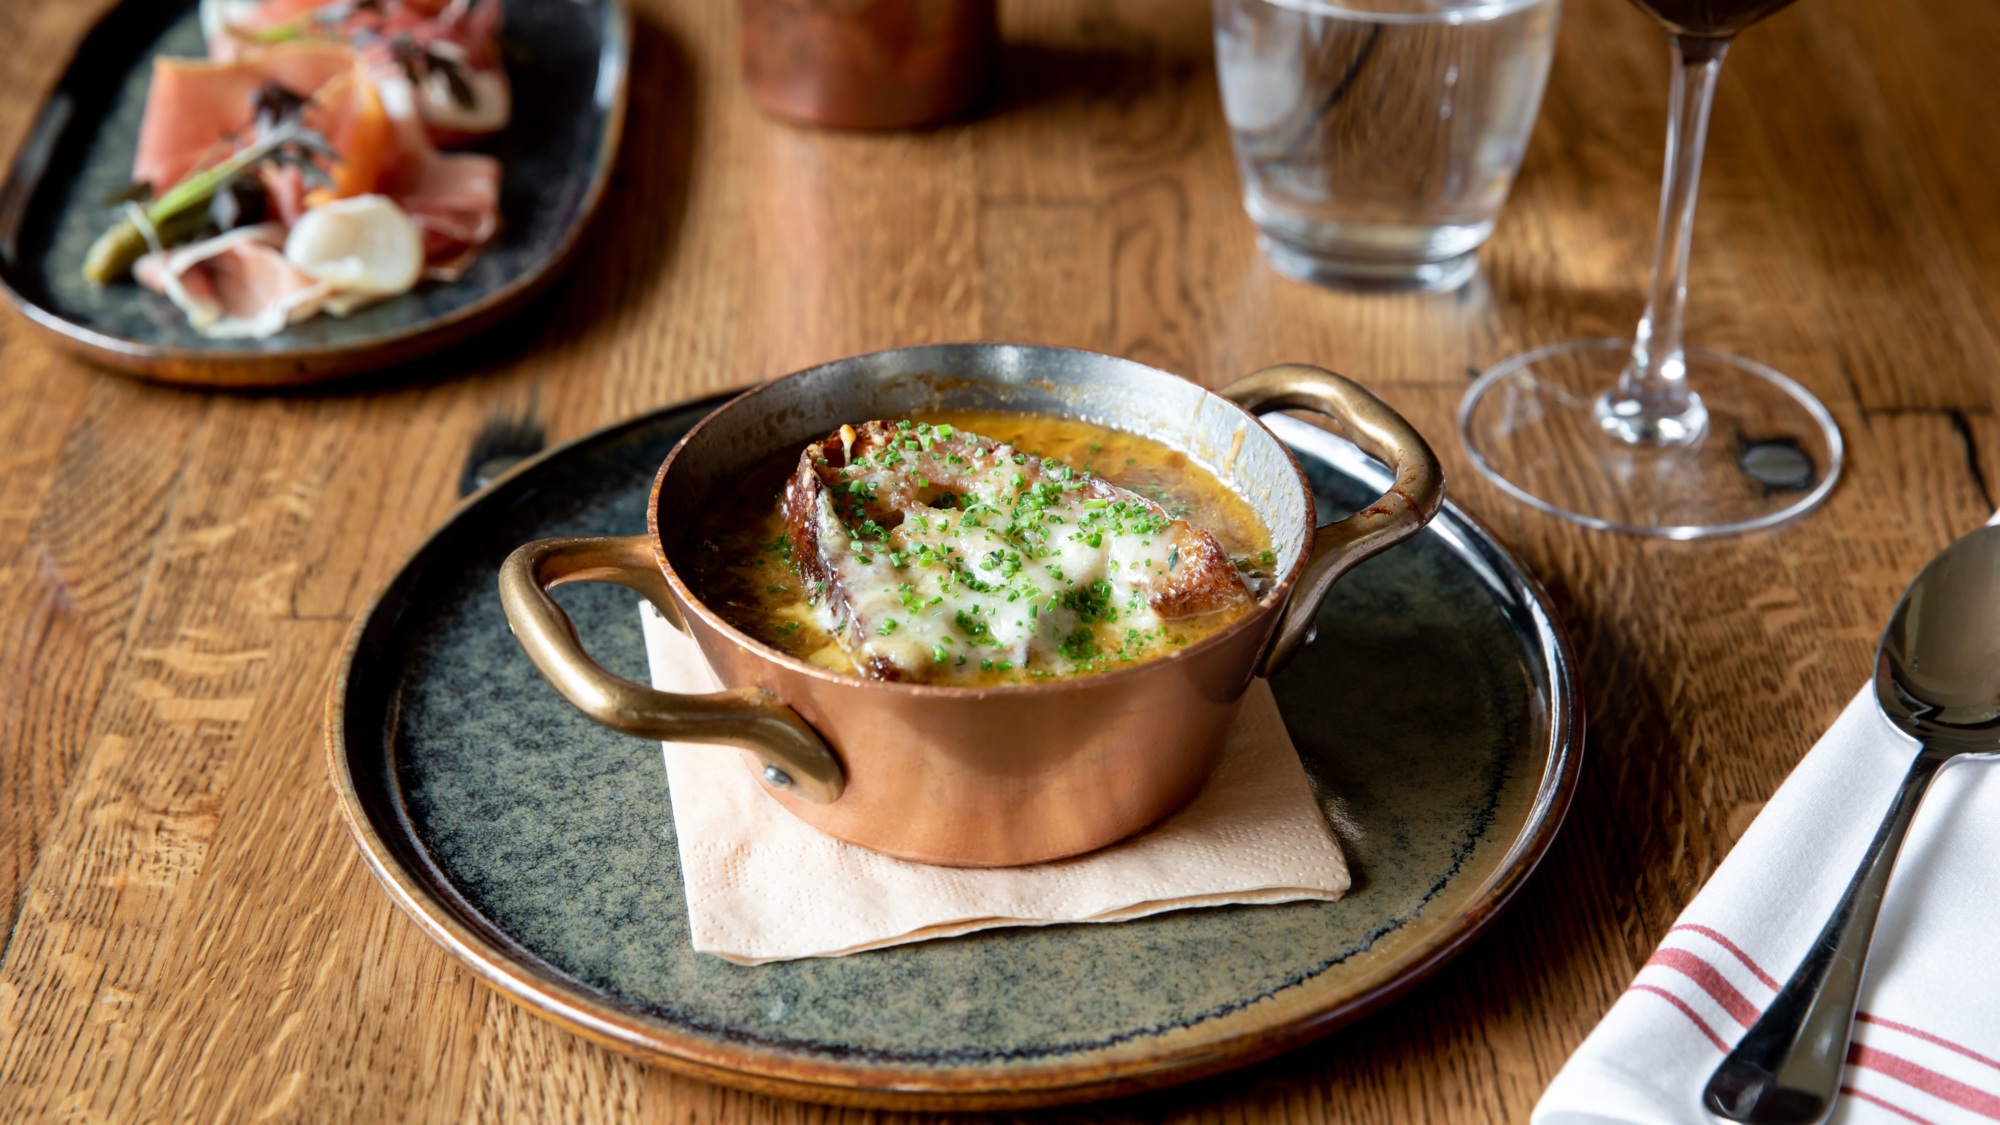 After more than a year, Bar Lyon (and its onion soup) are back.